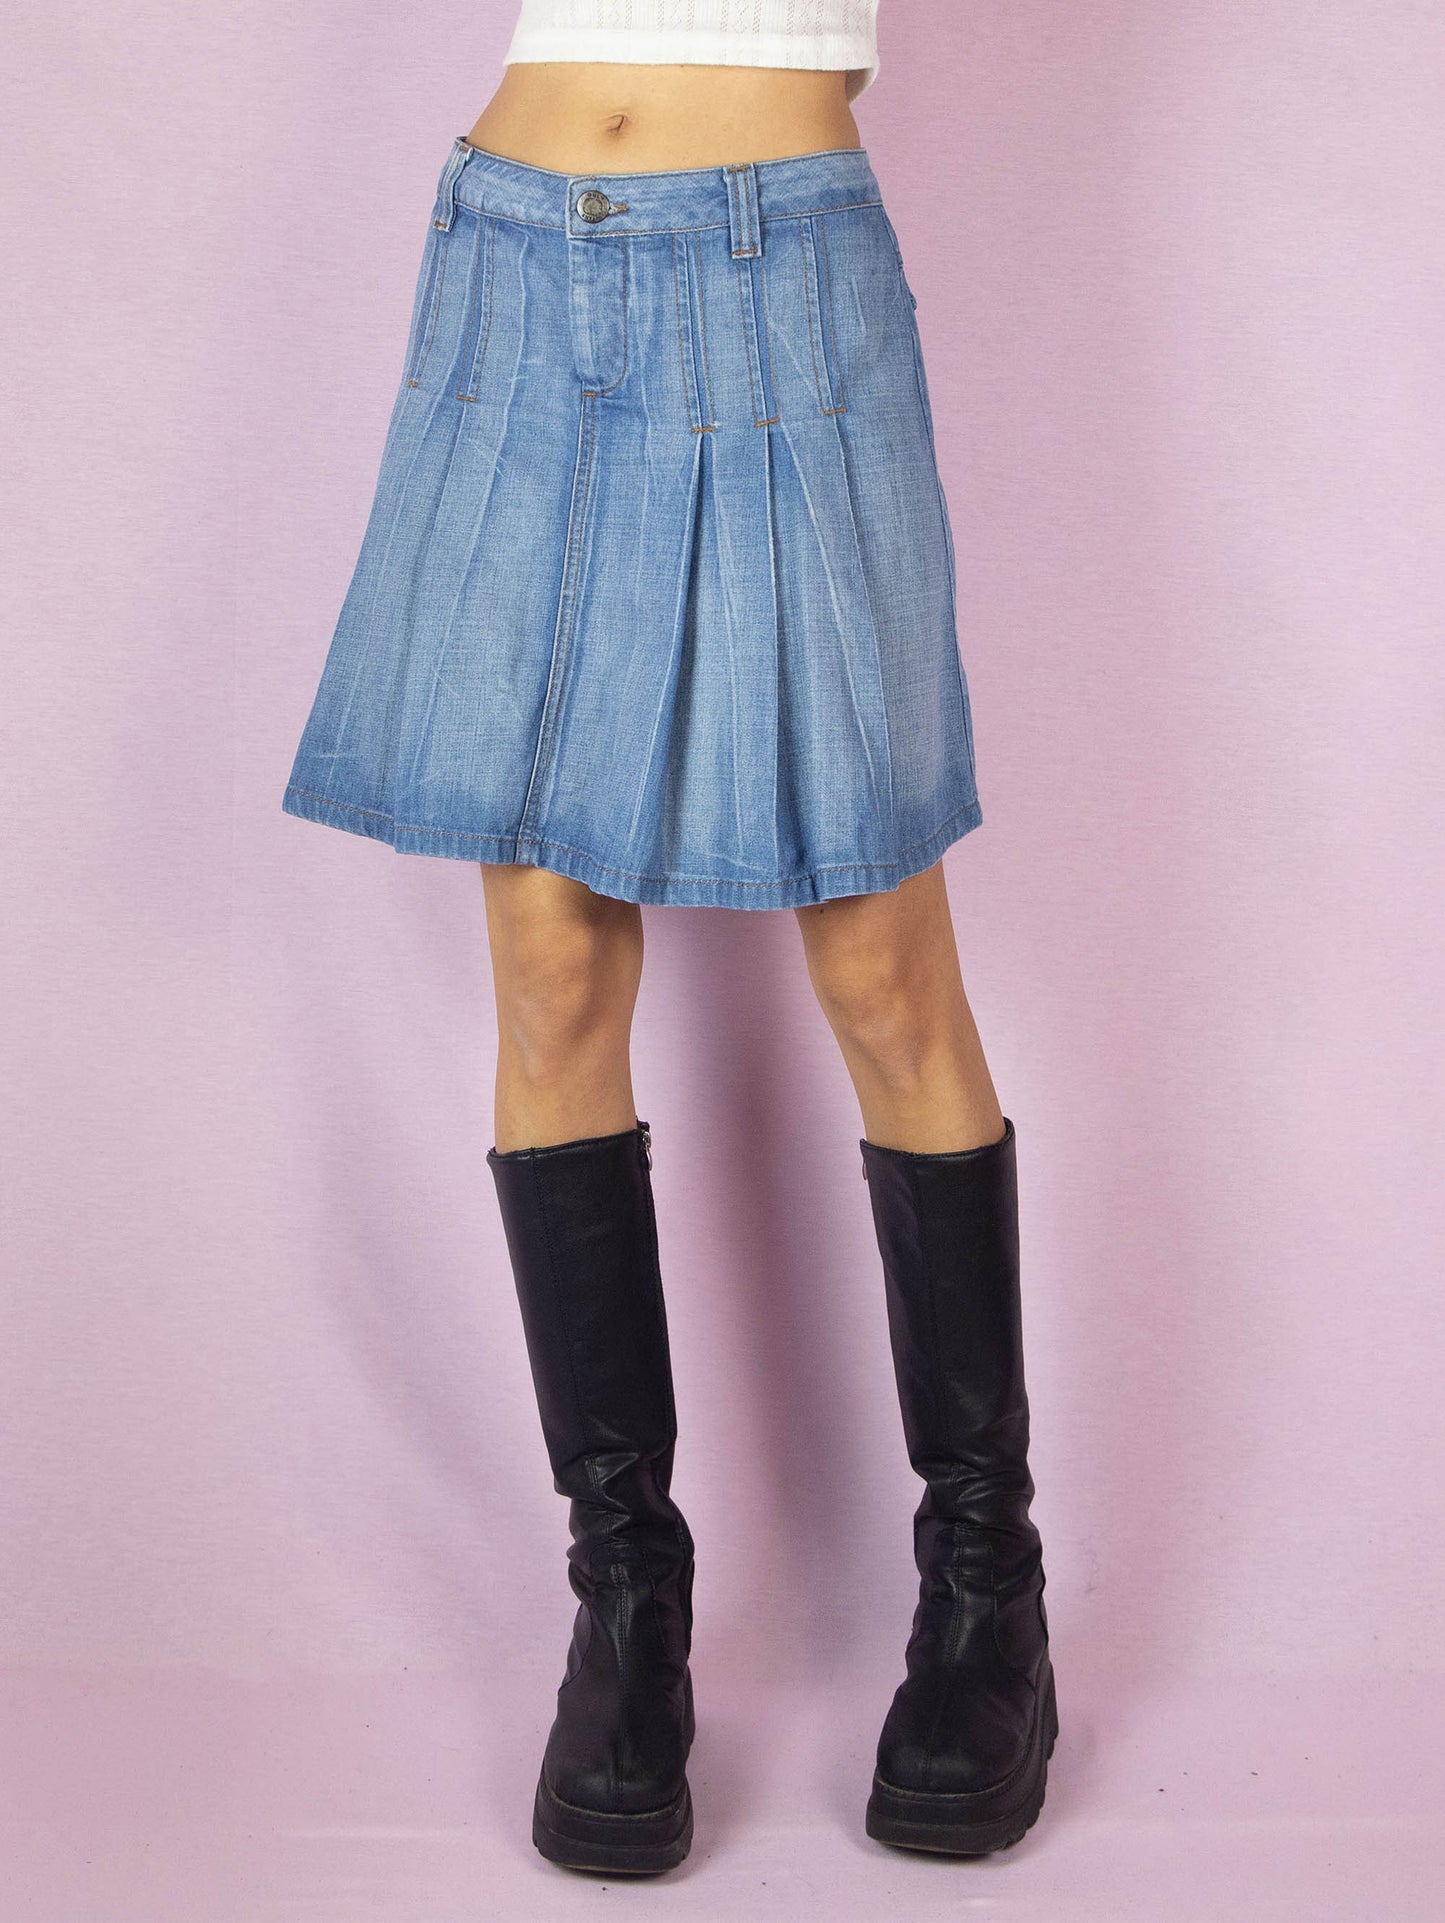 The Y2K Pleated Denim Mini Skirt is a vintage 2000s A-line jean skirt with an acid wash striped effect.